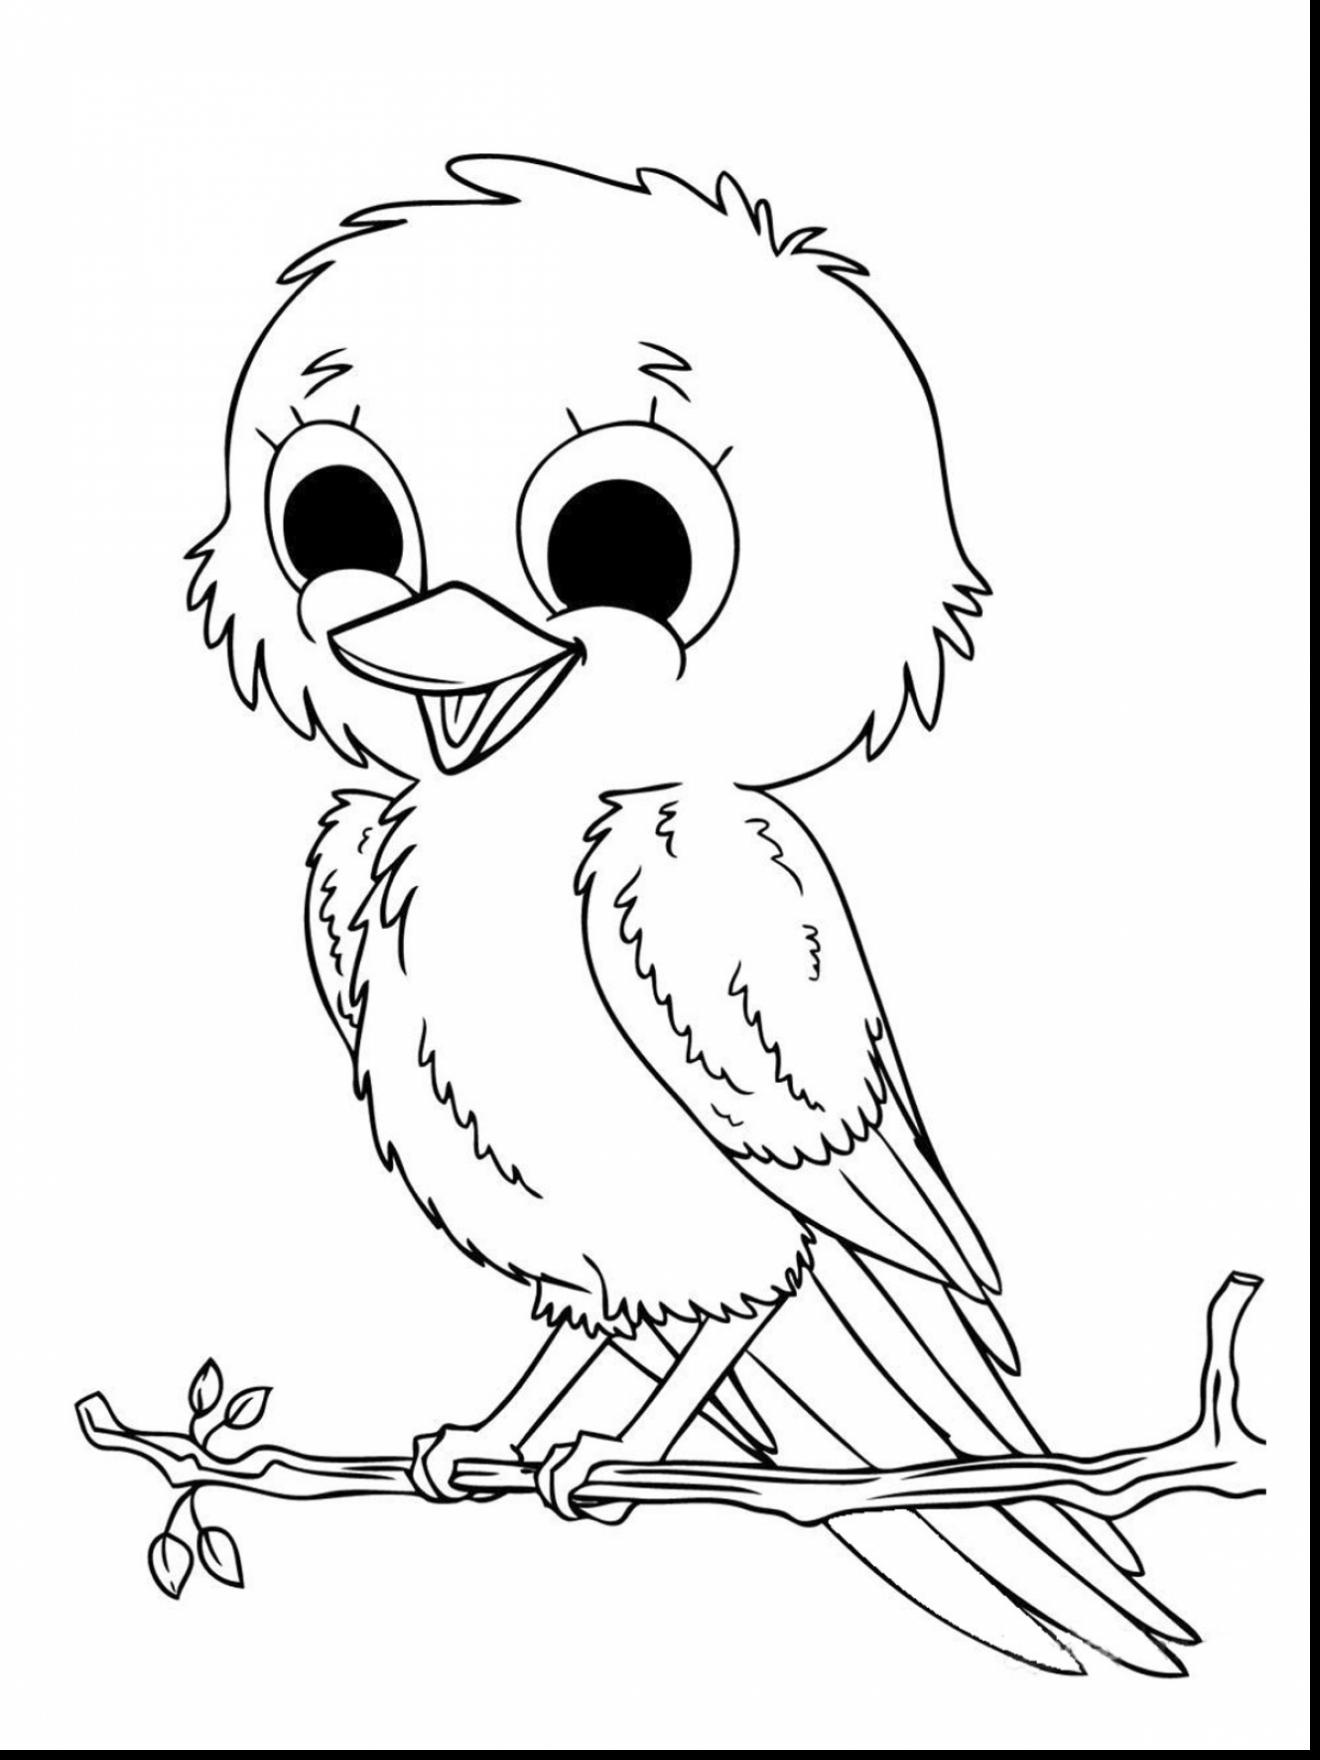 Realistic Baby Animal Coloring Pages at GetDrawings | Free download